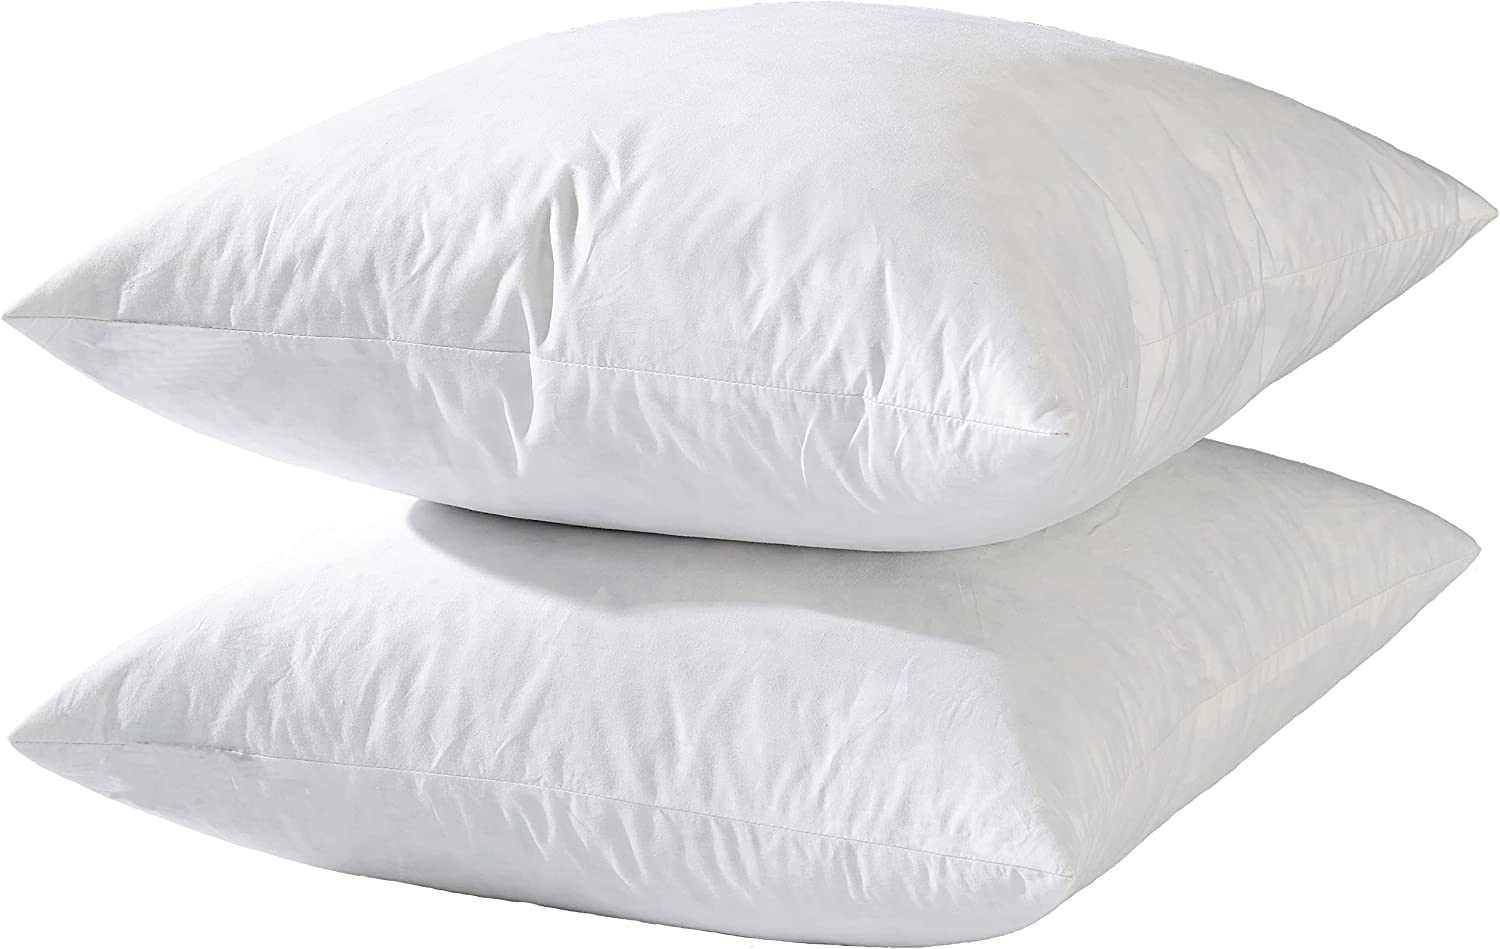 Basic Home Down-Proof Stitching Pillow Inserts, 2-Pack